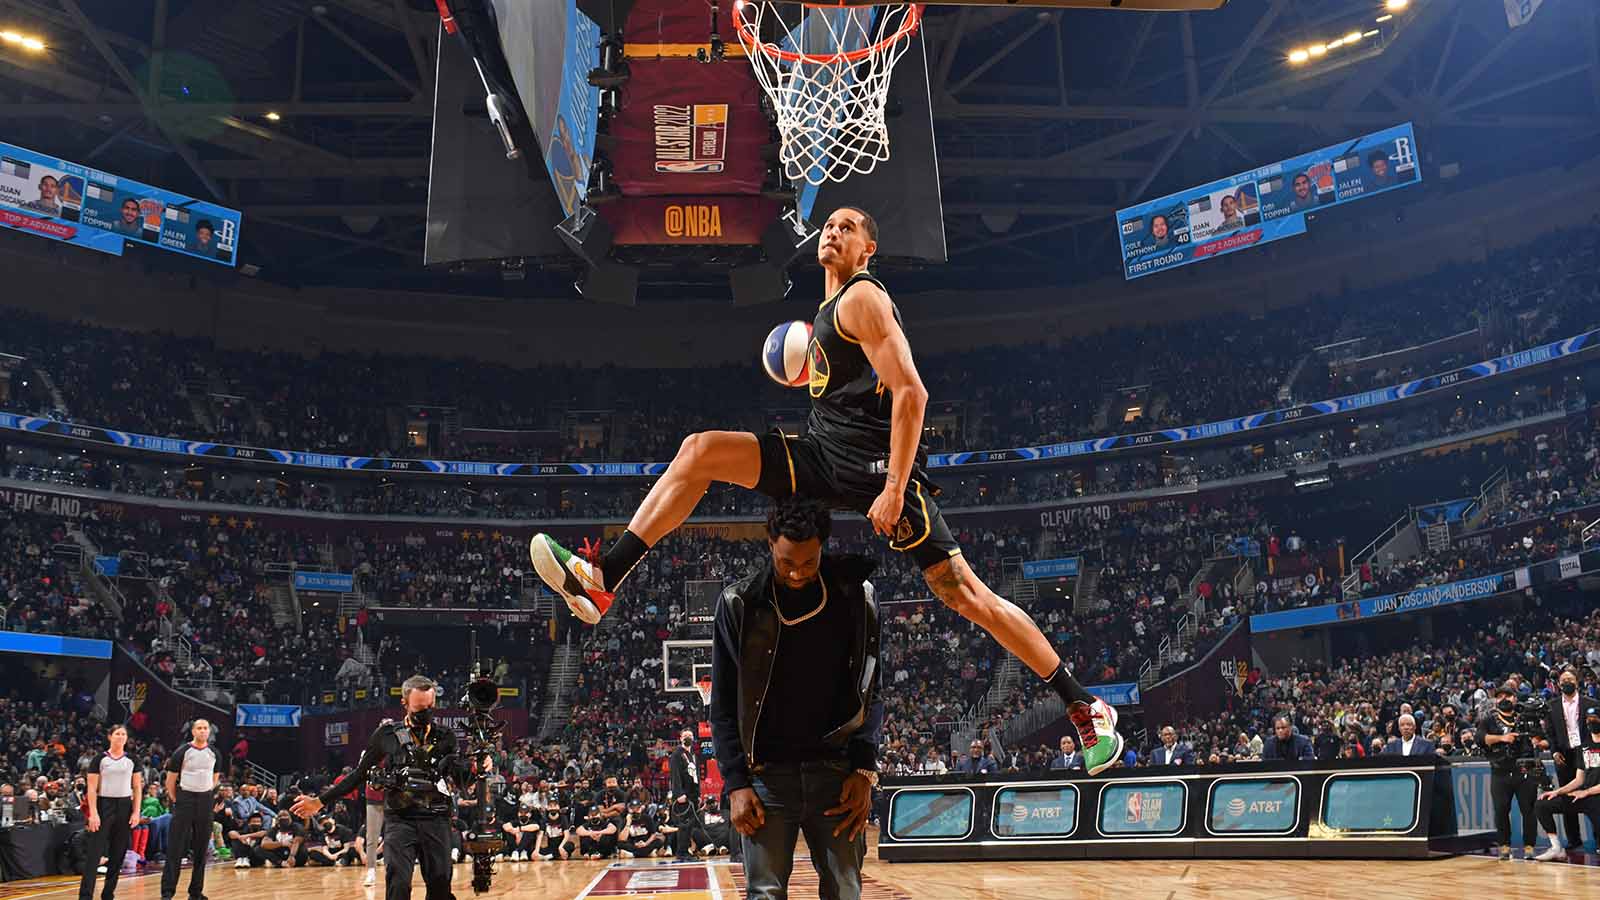 Juan Toscano-Anderson skies over Andrew Wiggins in NBA Dunk Contest – NBC Sports Bay Area